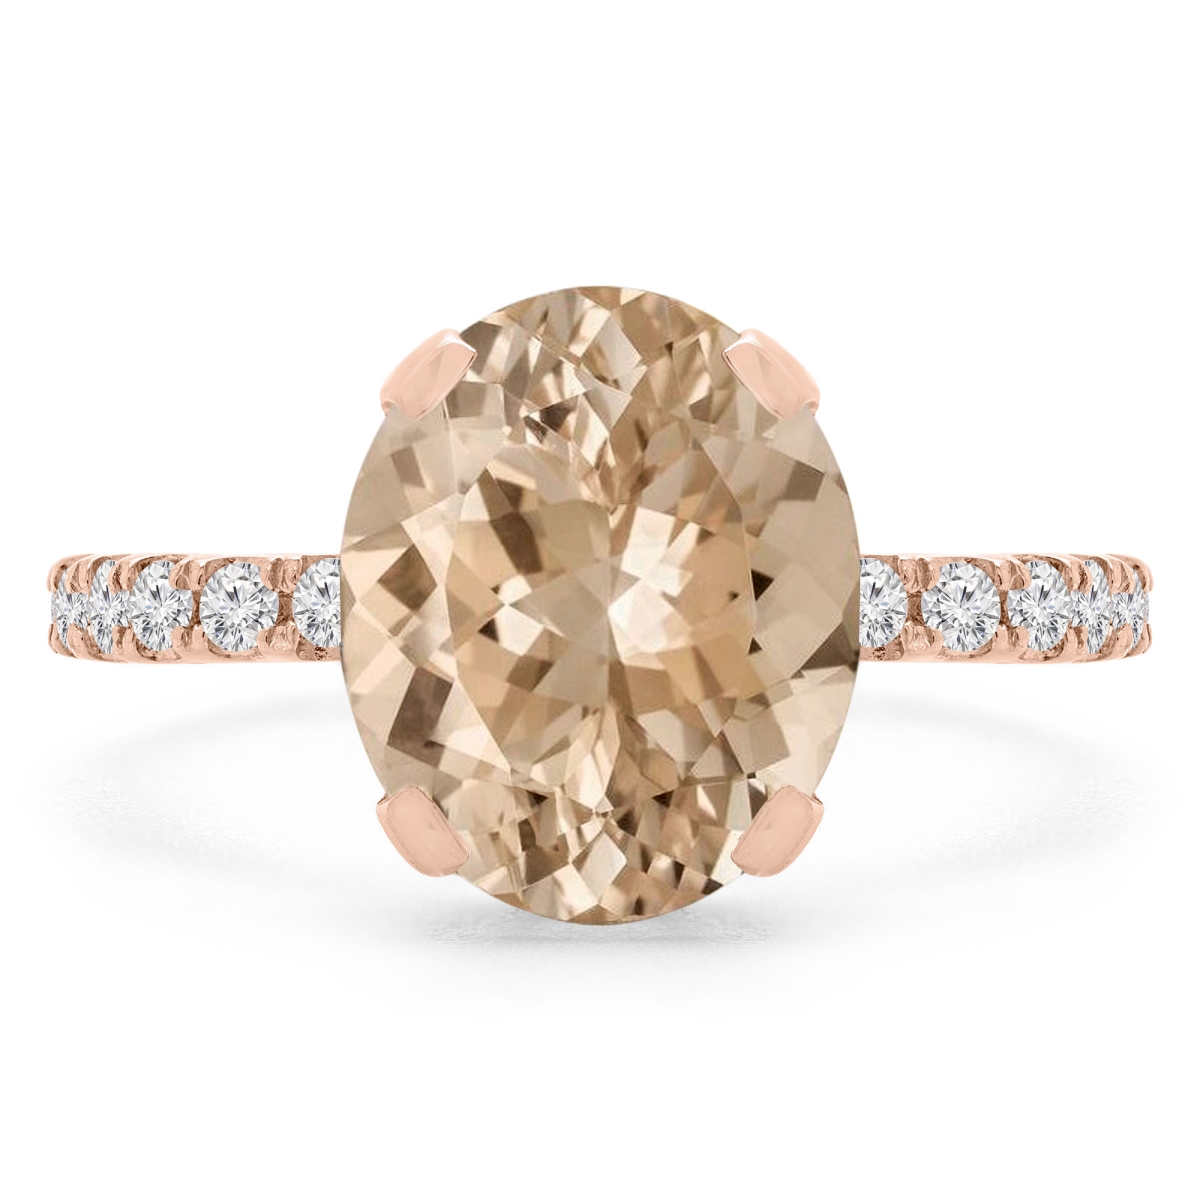 Picture of Majesty Diamonds MD190407-8 3.4 CTW Oval Pink Morganite Under Halo Engagement Ring in 14K Rose Gold - Size 8